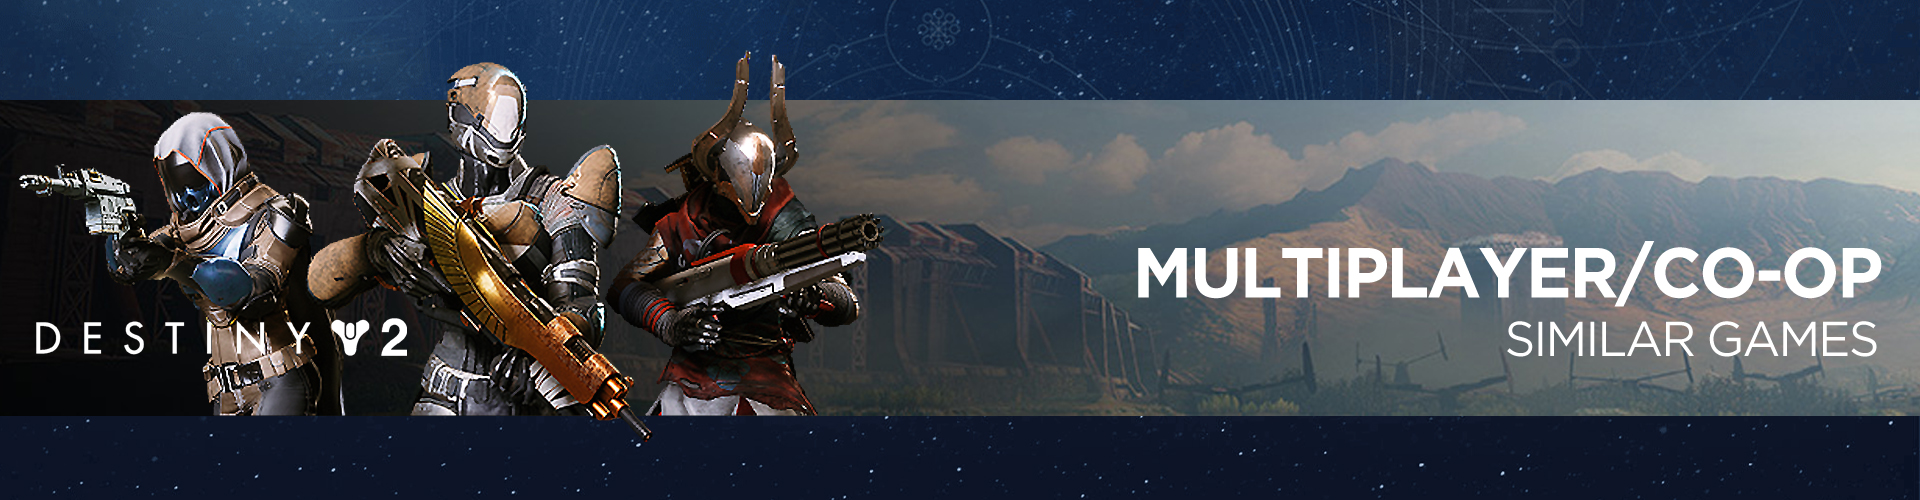 Multiplayer Co-op Games Like Destiny 2